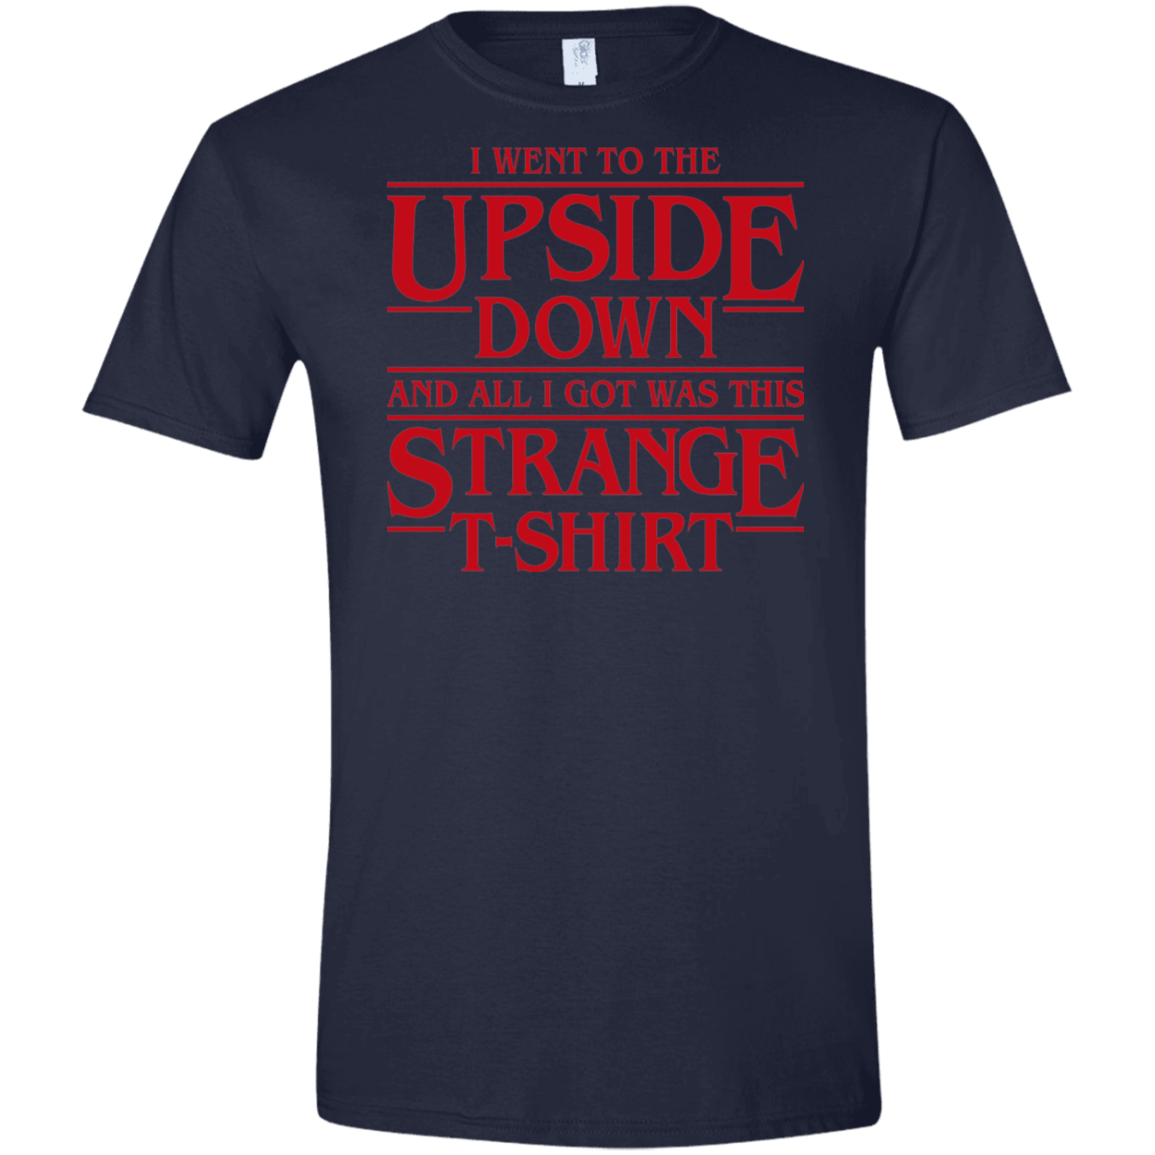 T-Shirts Navy / X-Small I Went to the Upside Down Men's Semi-Fitted Softstyle